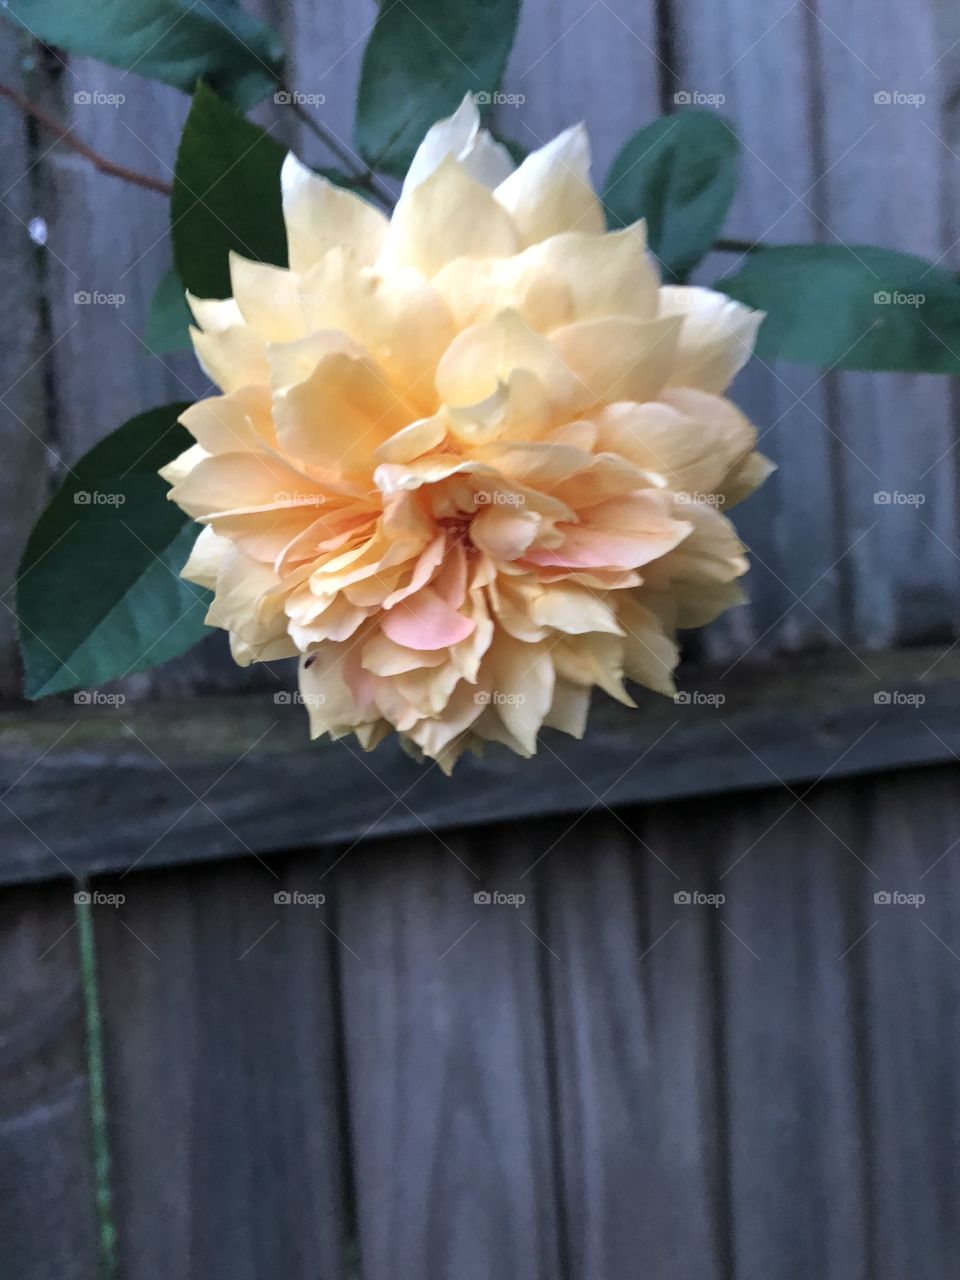 An exquisite yellow rose against a wooden fence. 